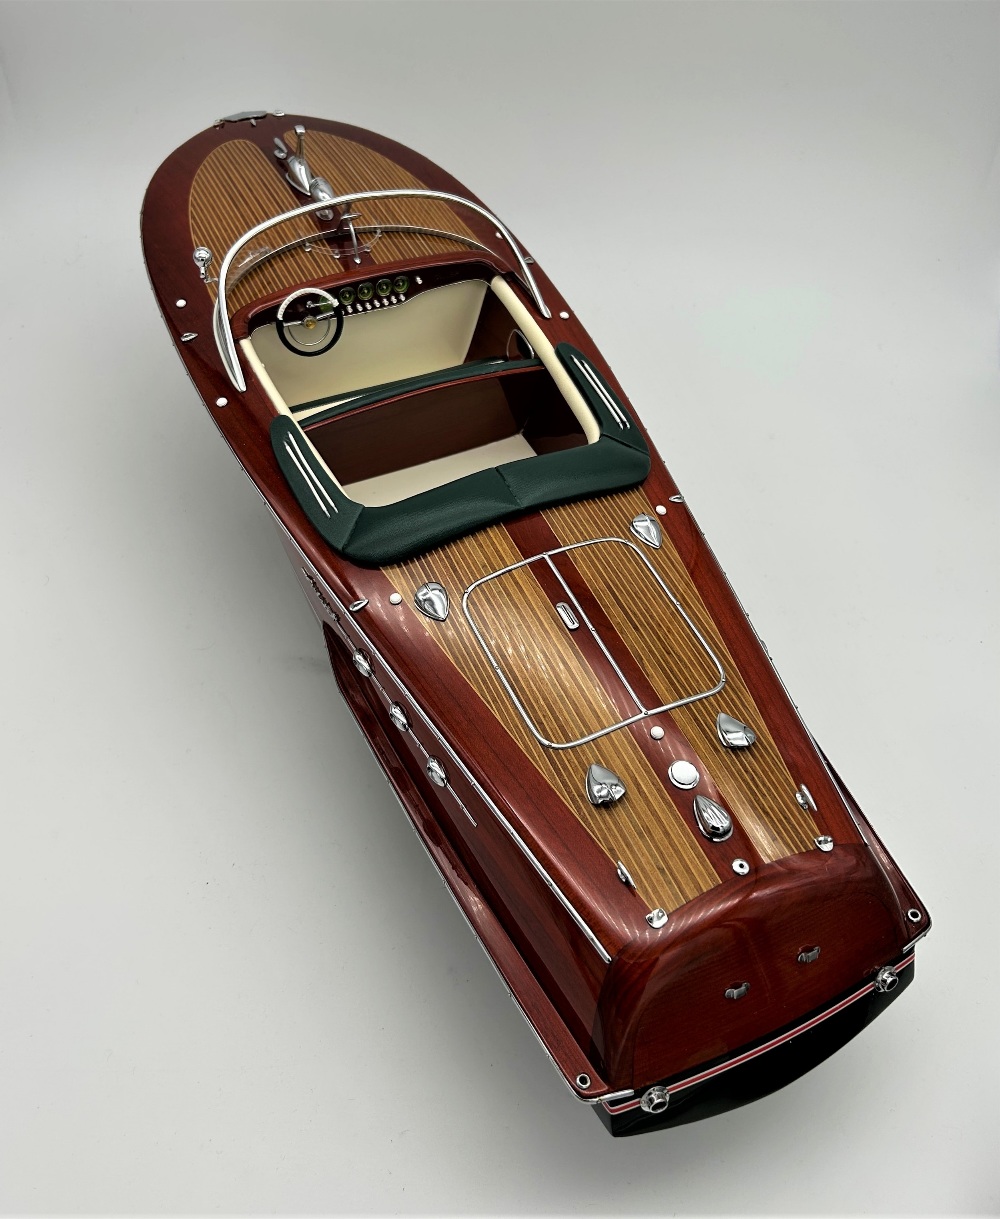 1:10 SCALE RIVA ARISTON MOTORBOAT BY KIADE Produced from 1950 to 1974, and fitted with a powerful - Image 5 of 8